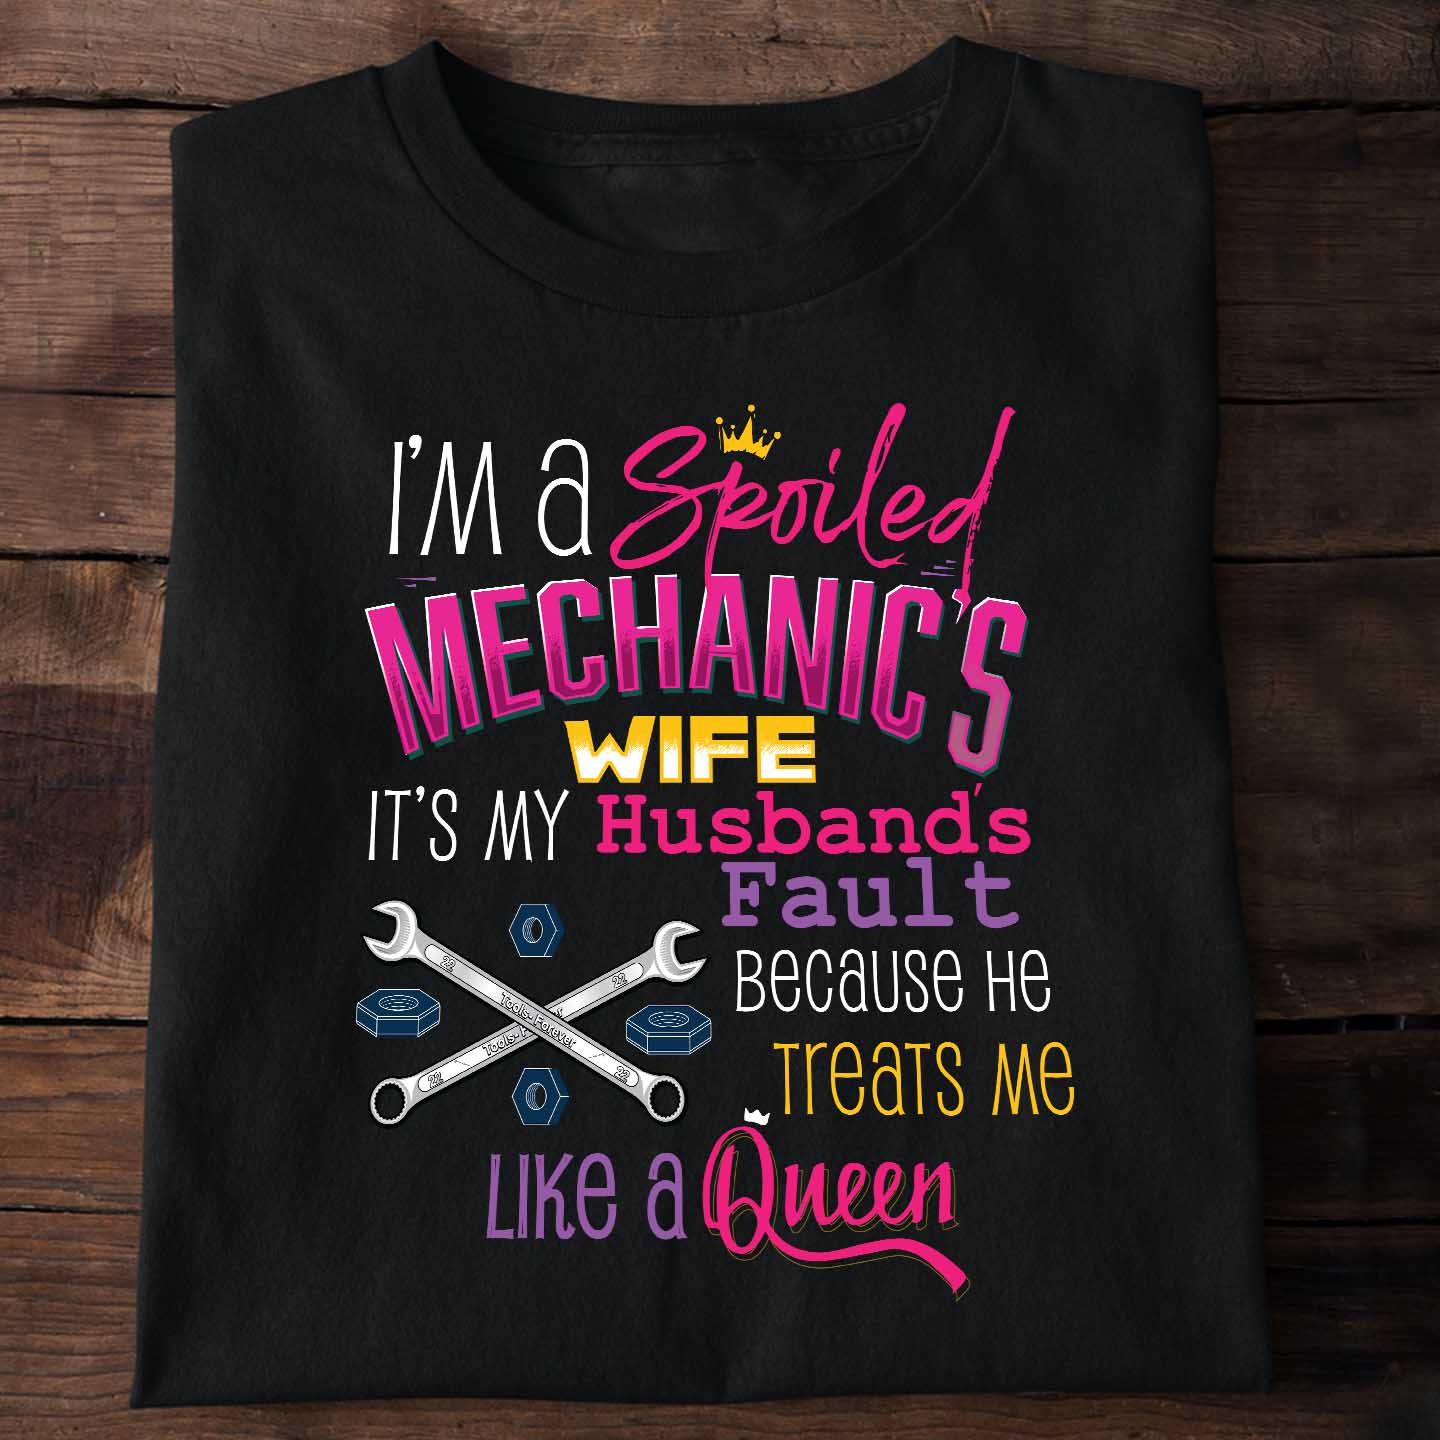 I'm a spoiled mechanic's wife It's my husband's fault because he treats me like a queen